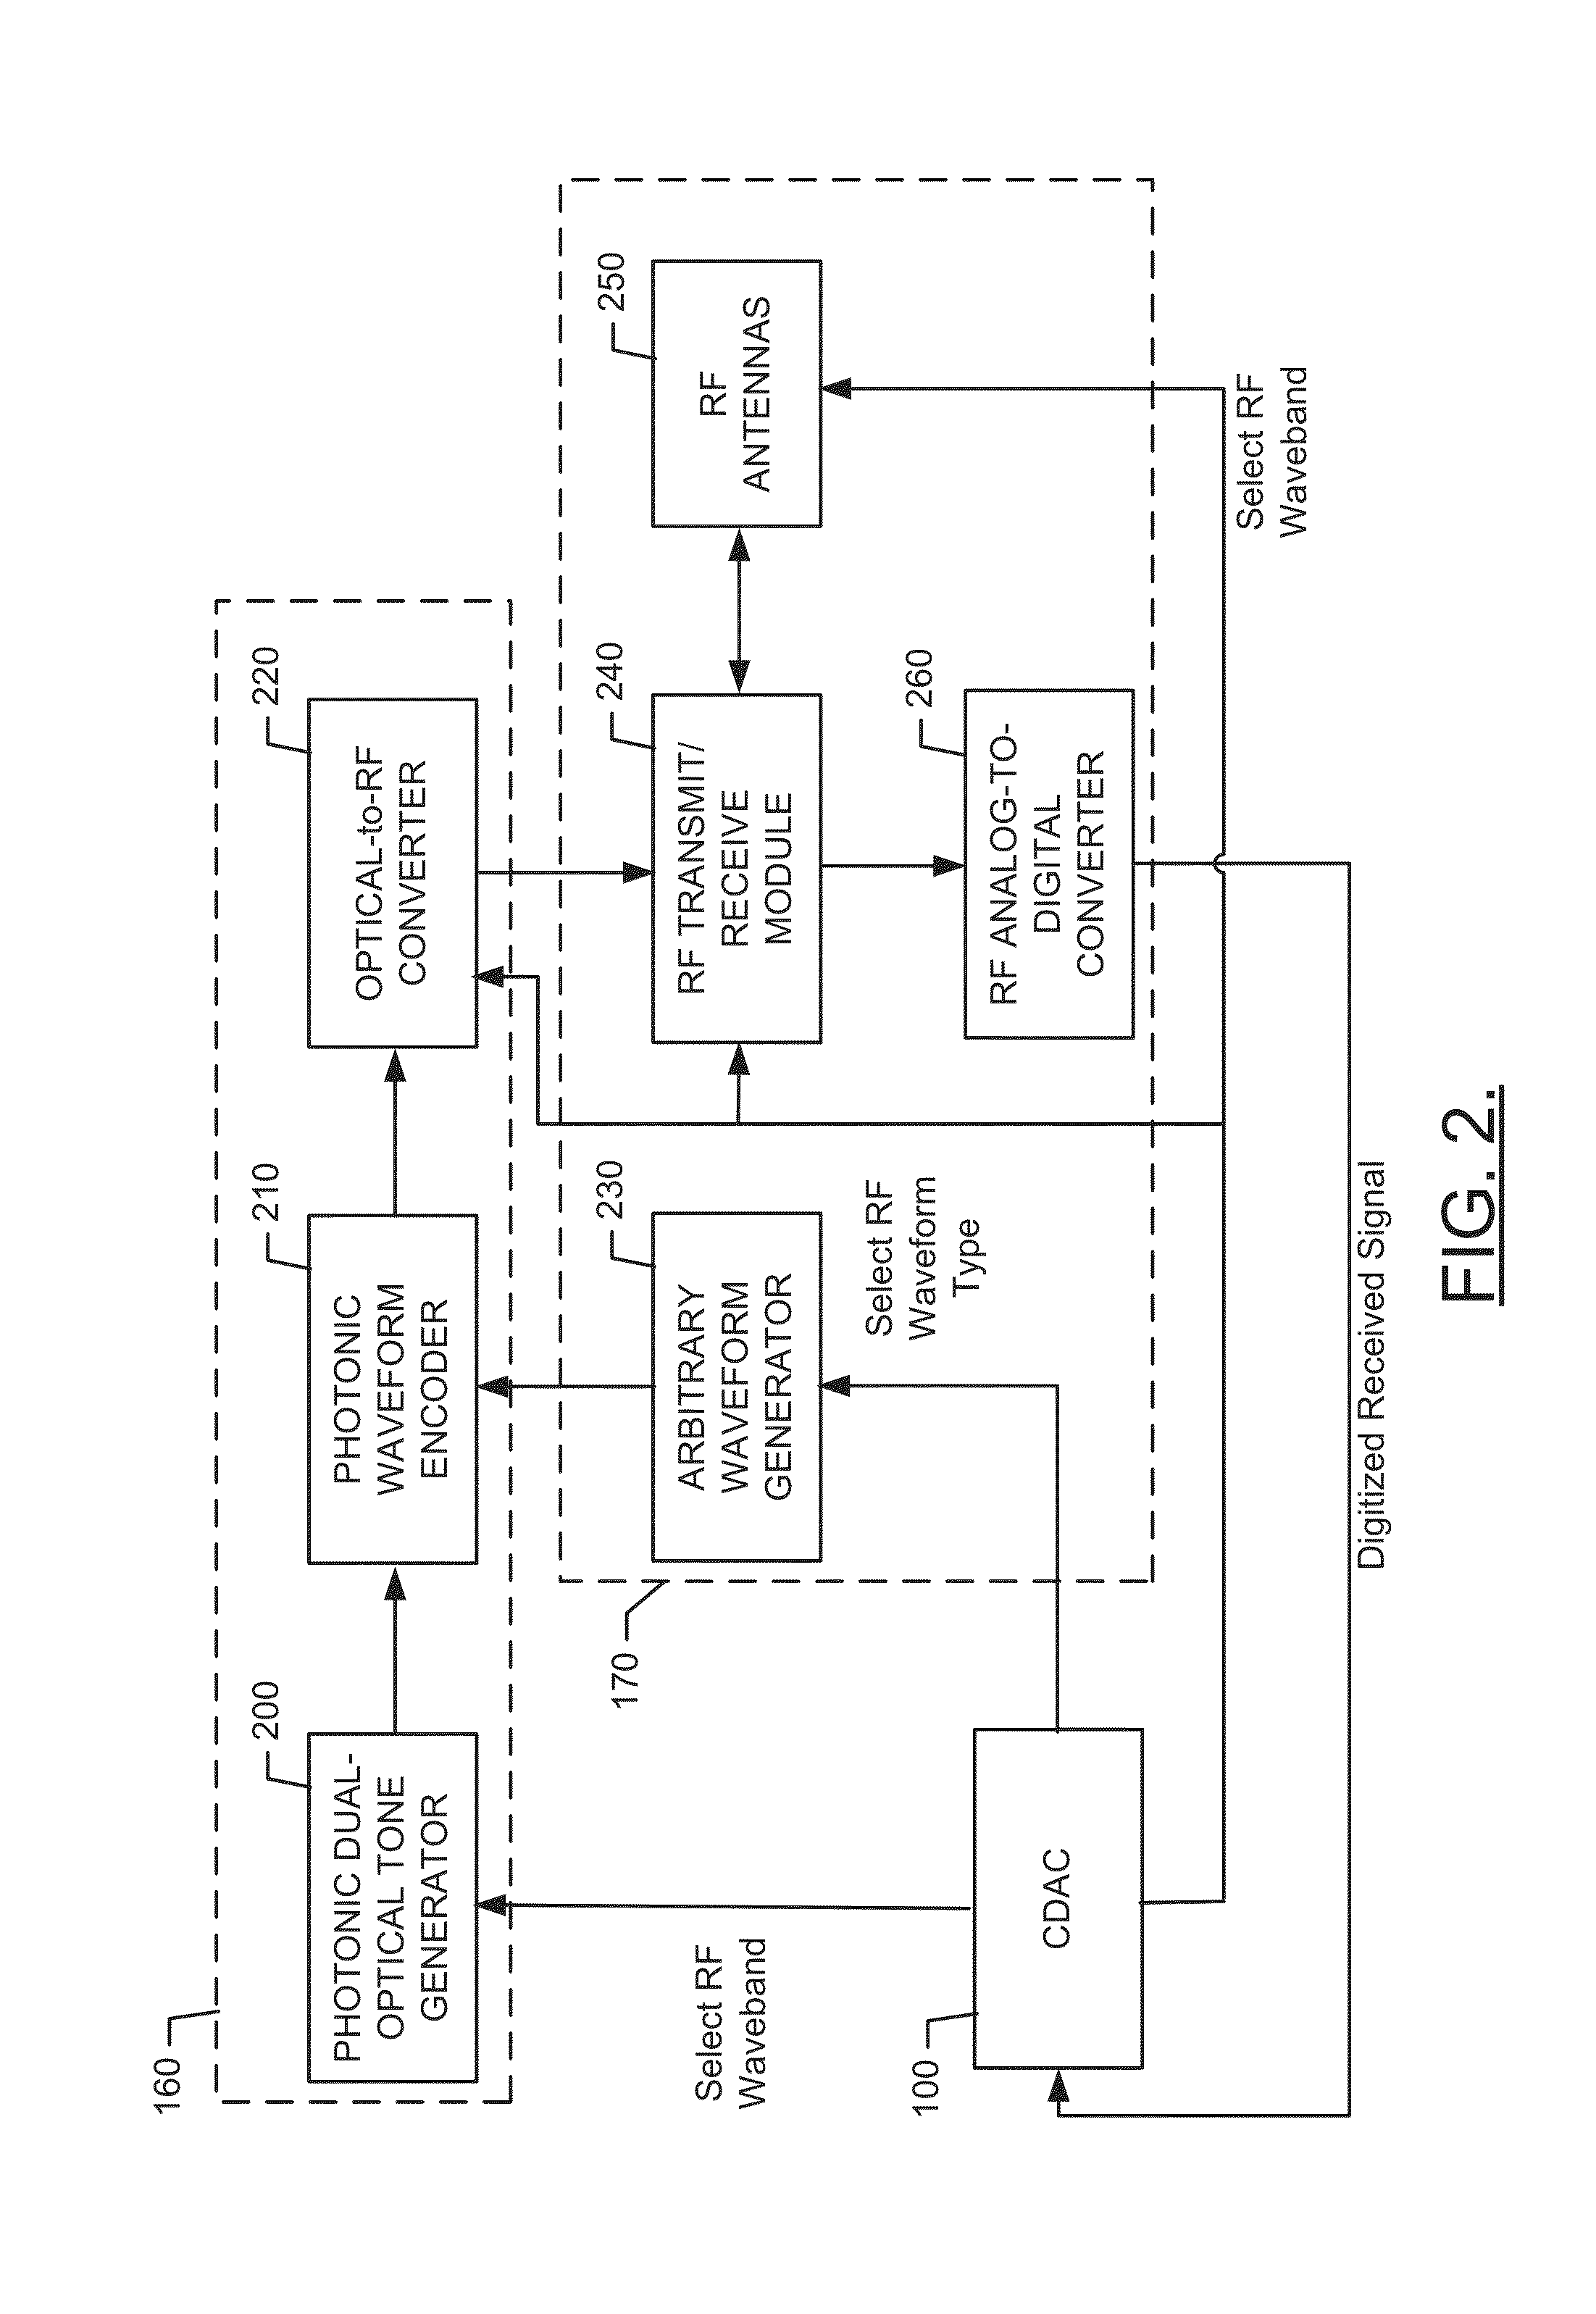 Photonically Enabled RF Transmitter/Receiver